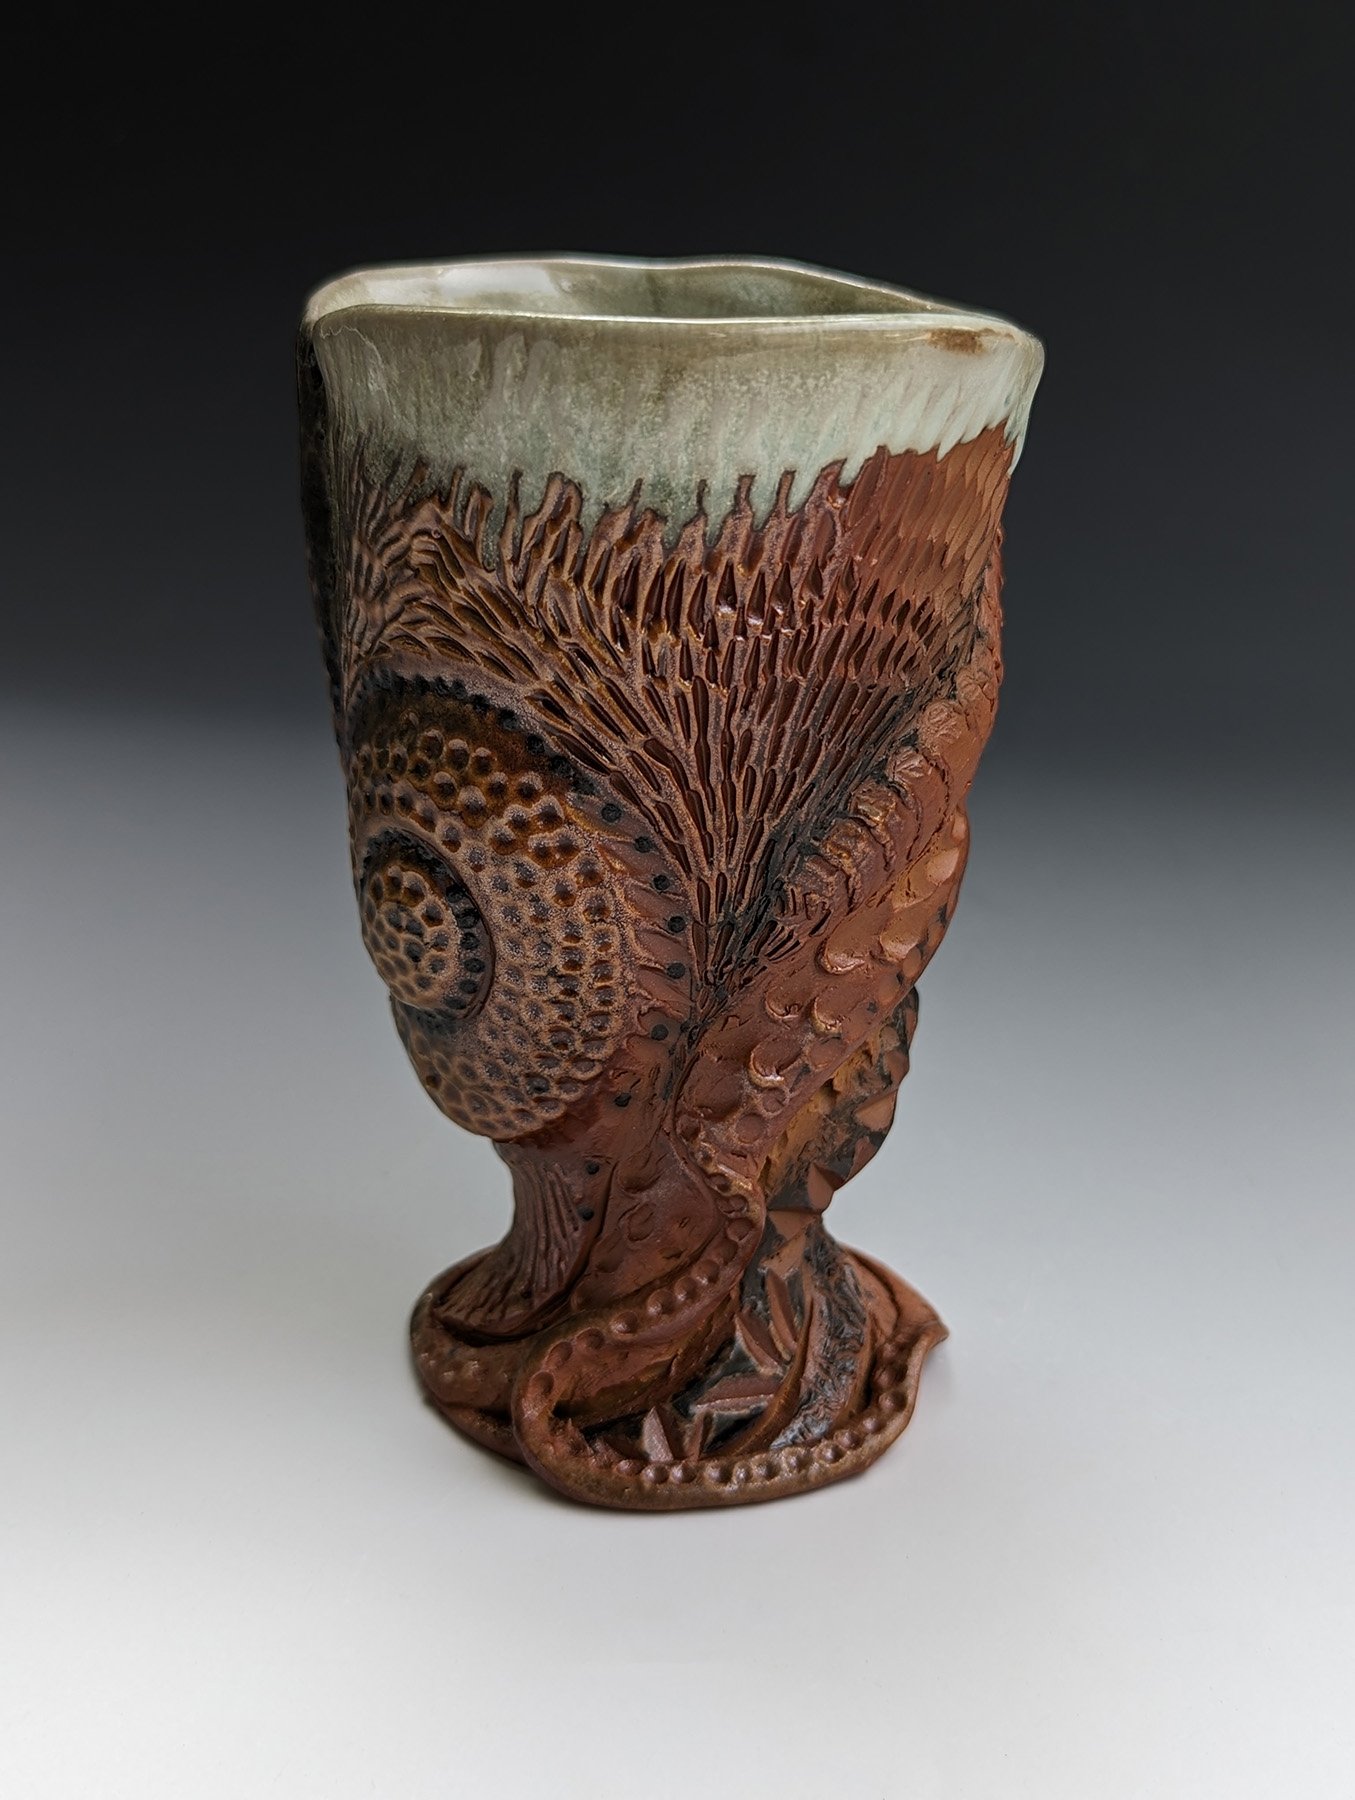    Carved Cup #2,   wood-fired ceramics, 5 x 4 x 4 inches 